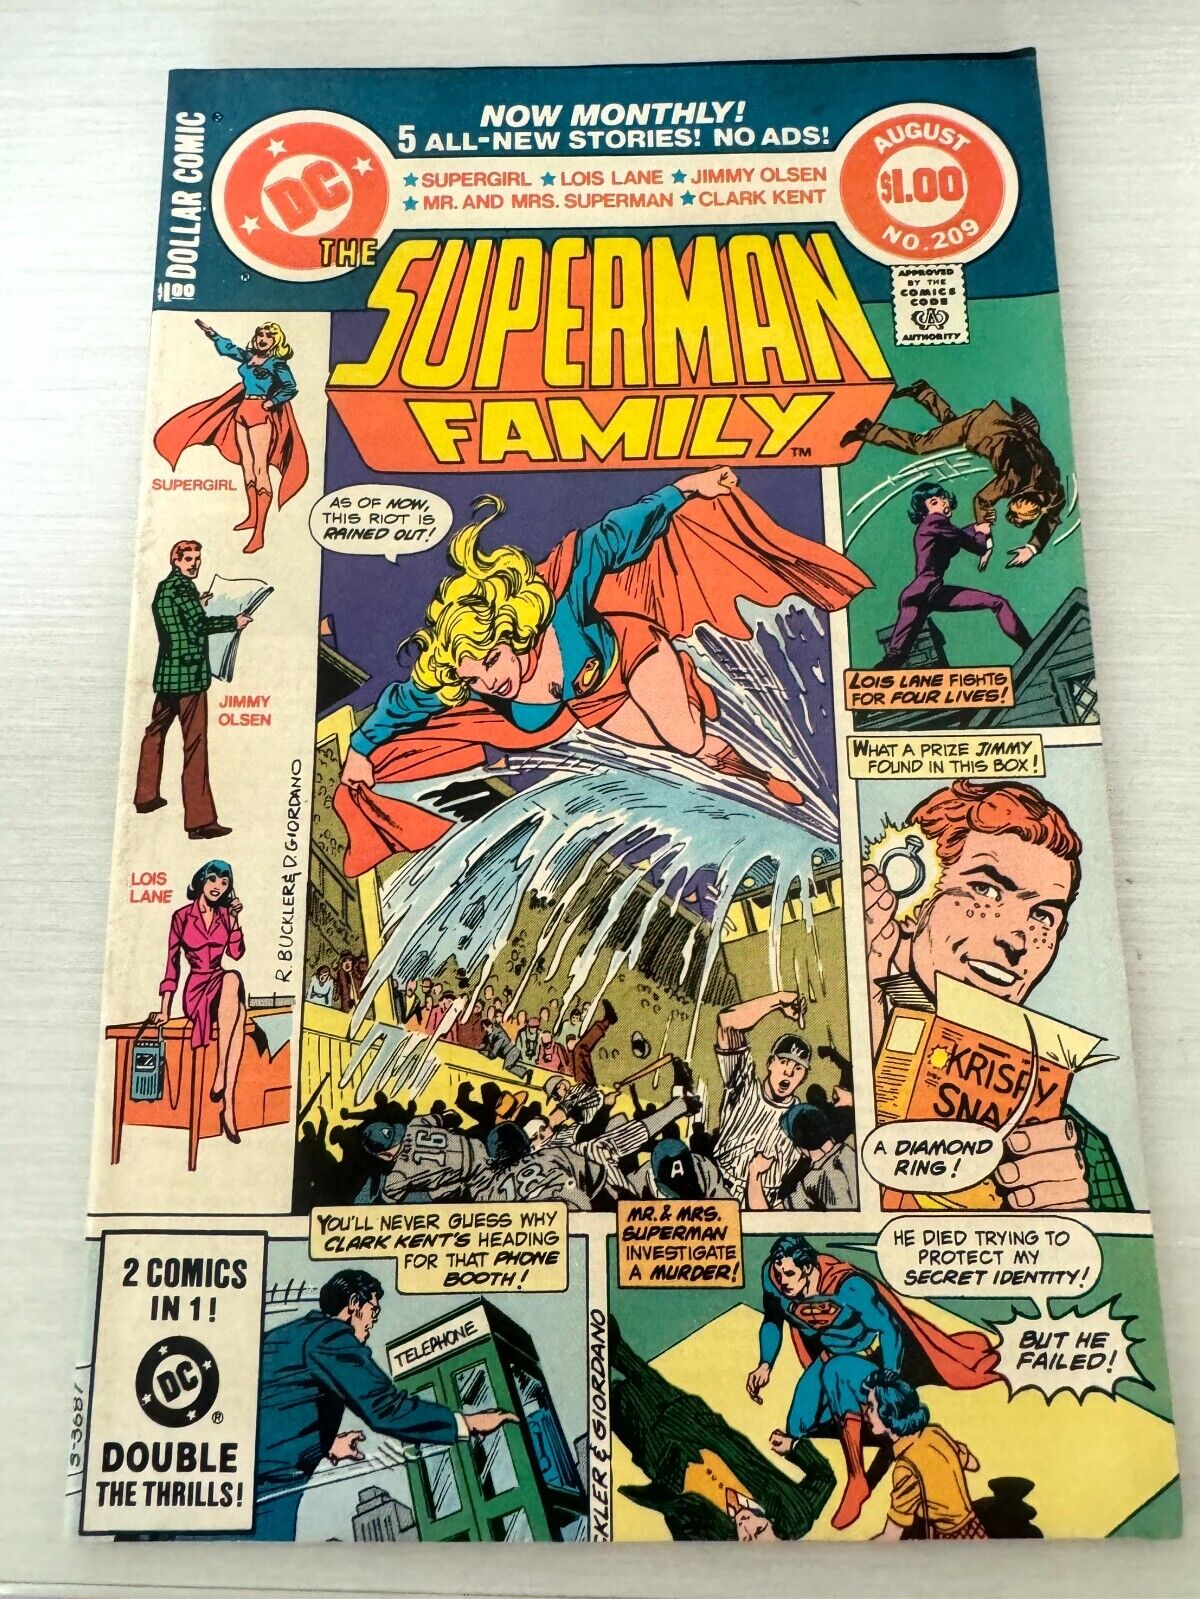 THE SUPERMAN FAMILY #209 1981 BRONZE AGE